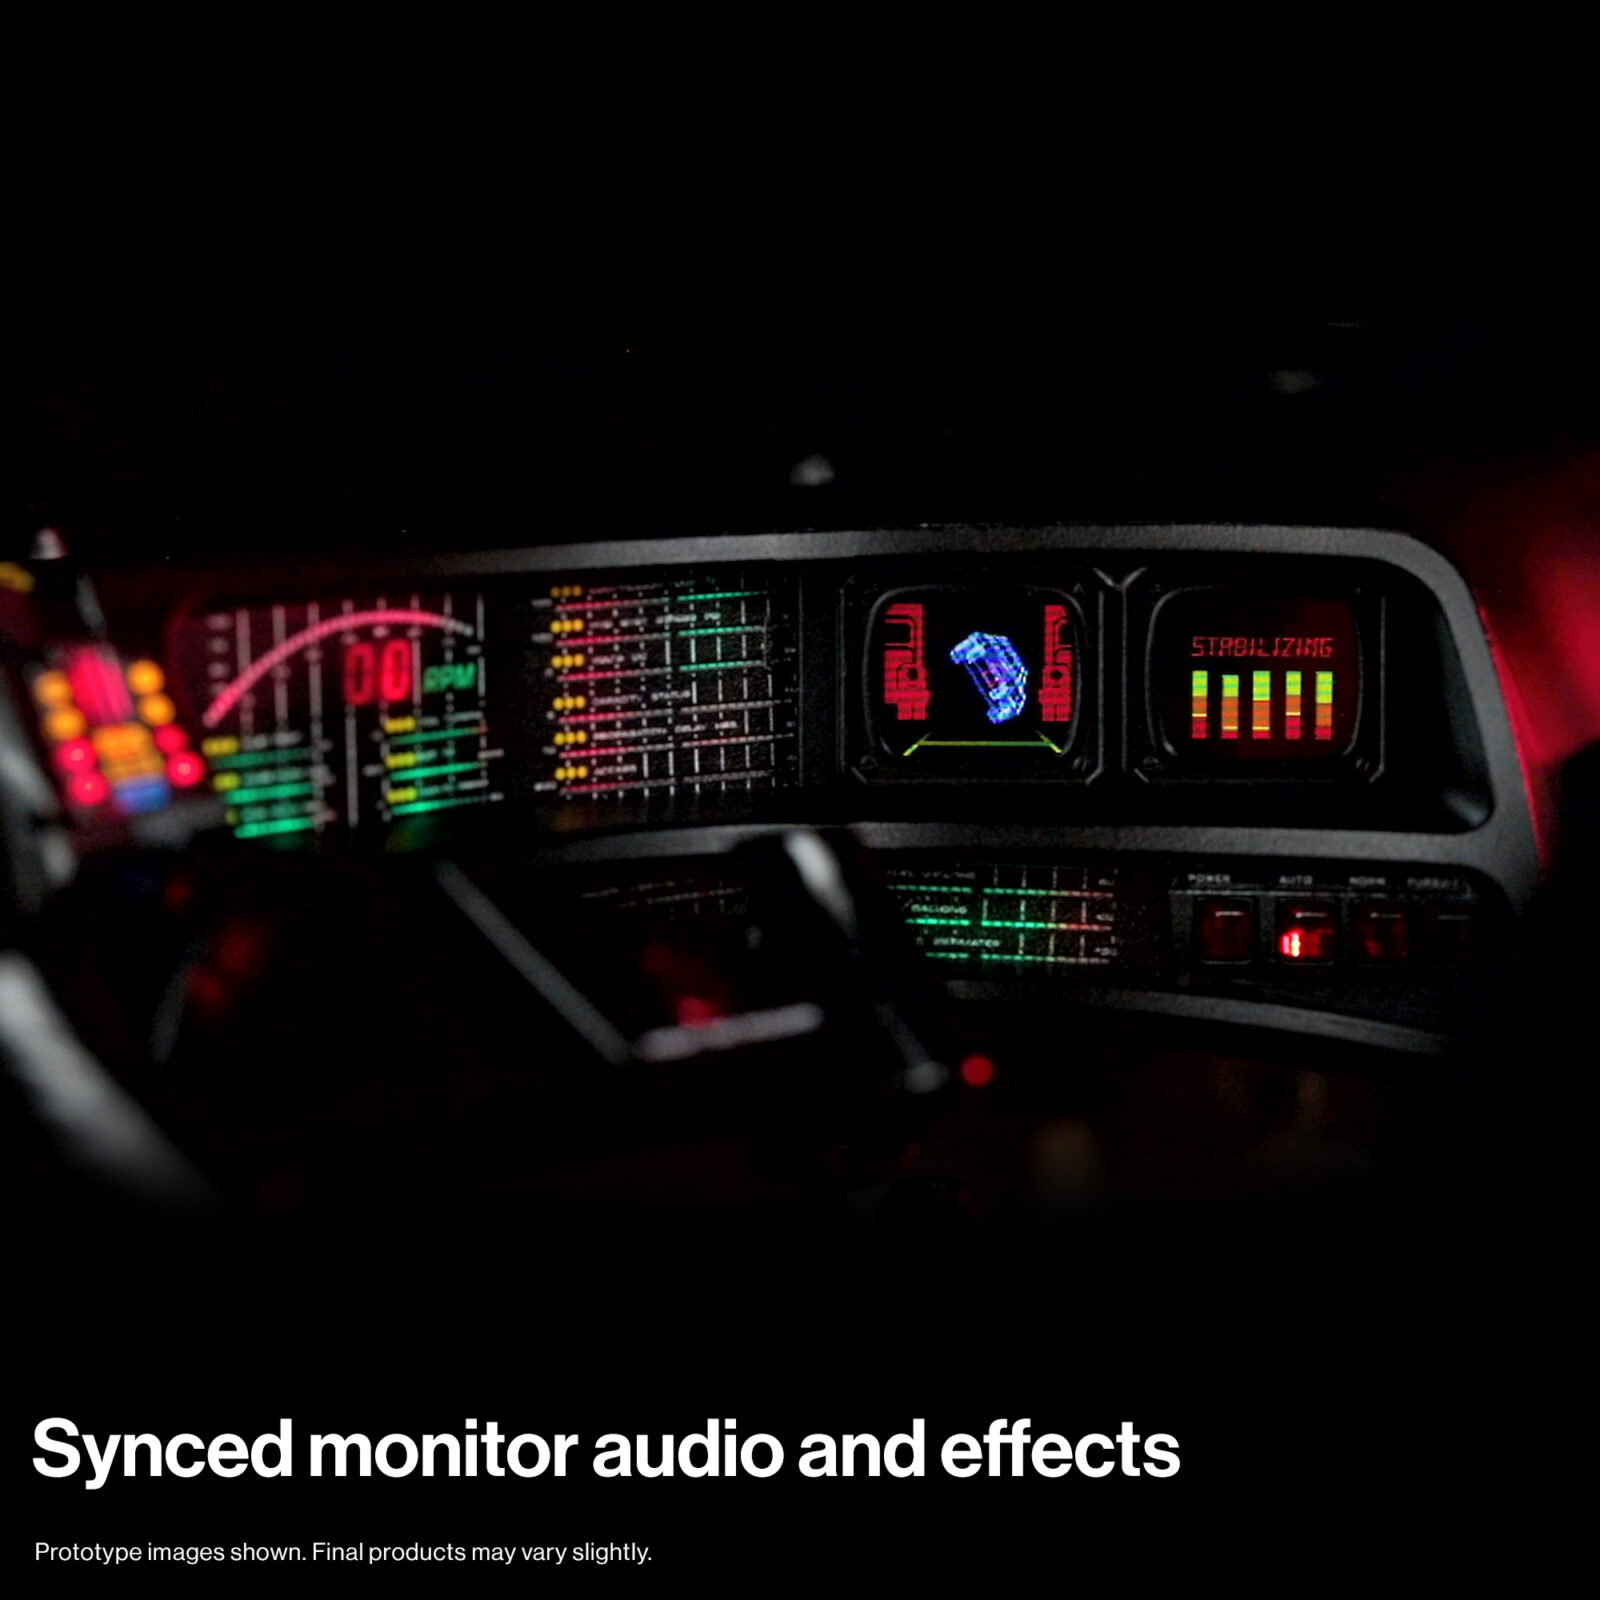 Synced monitor audio and effects on KITT dashboard